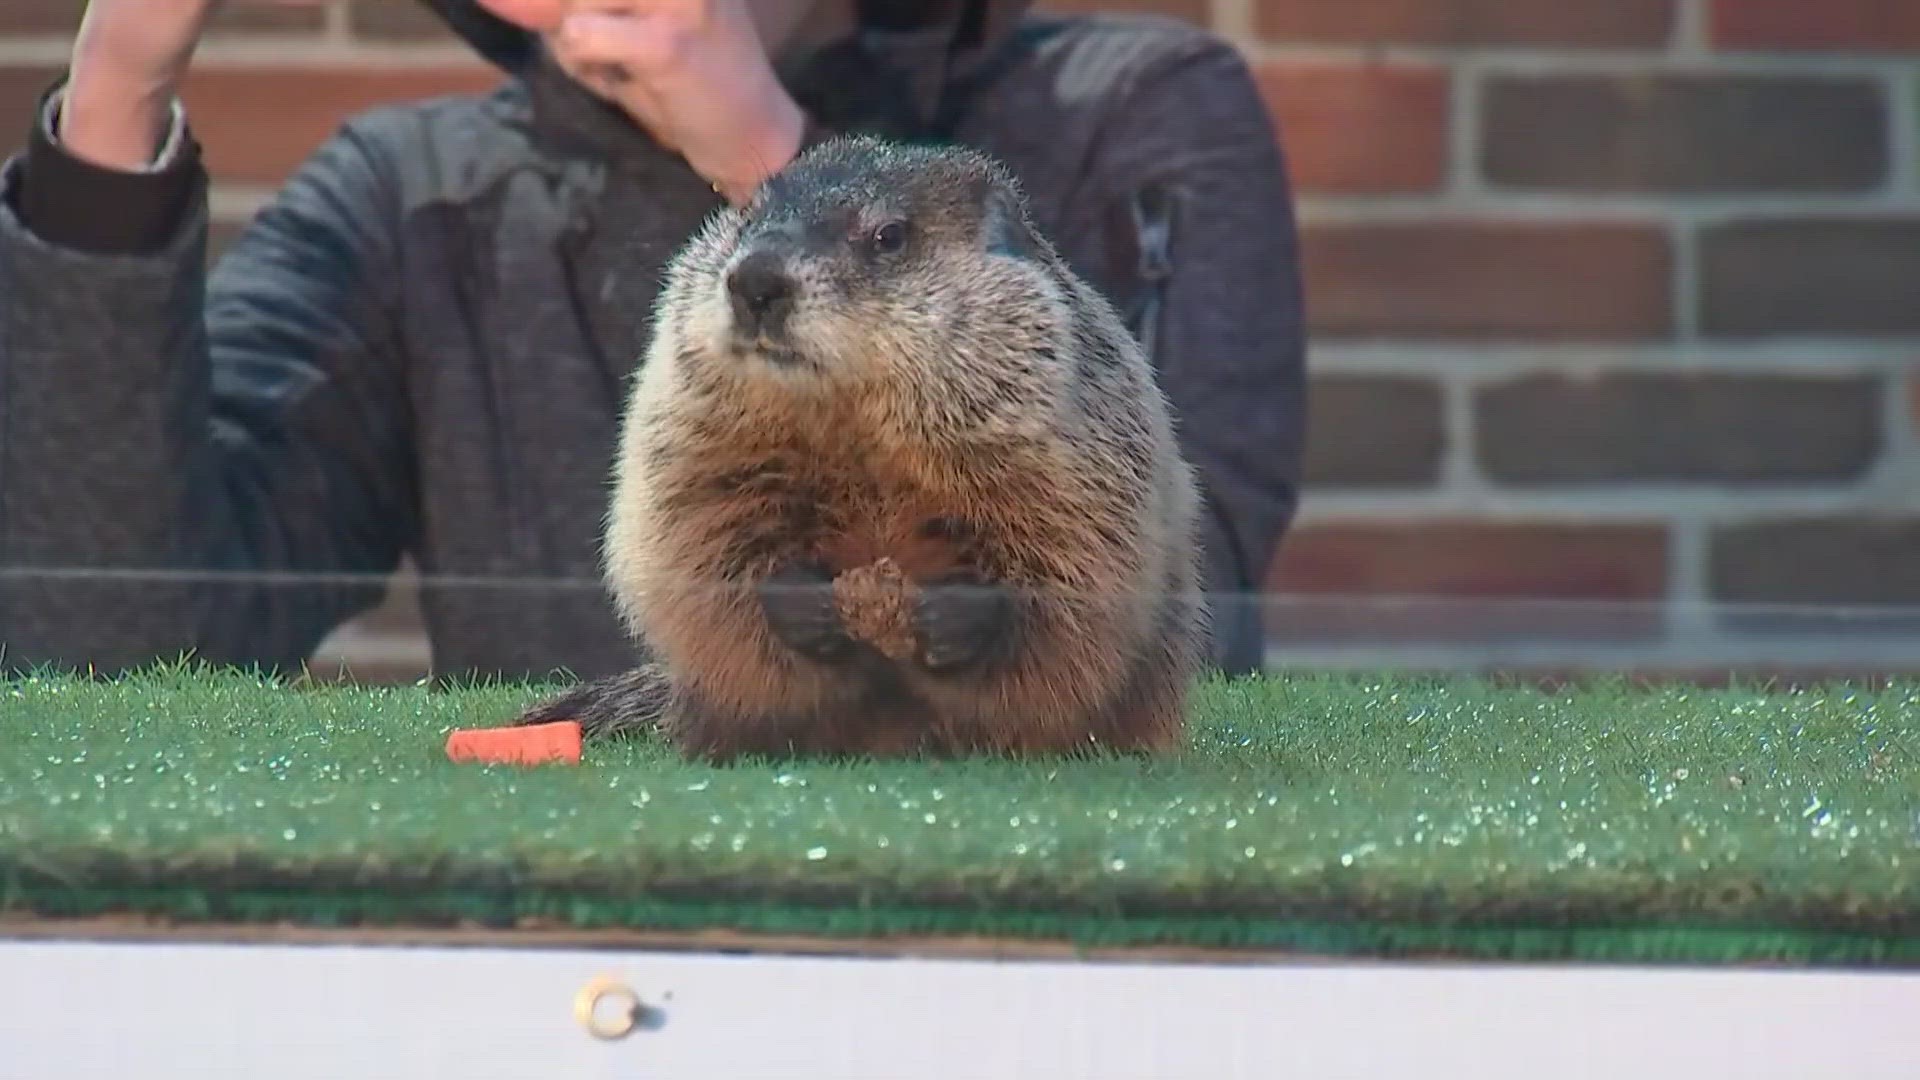 Both Punxsutawney Phil and Buckeye Chuck are predicting an early start to spring after neither saw their shadow on Groundhog Day early Friday morning.